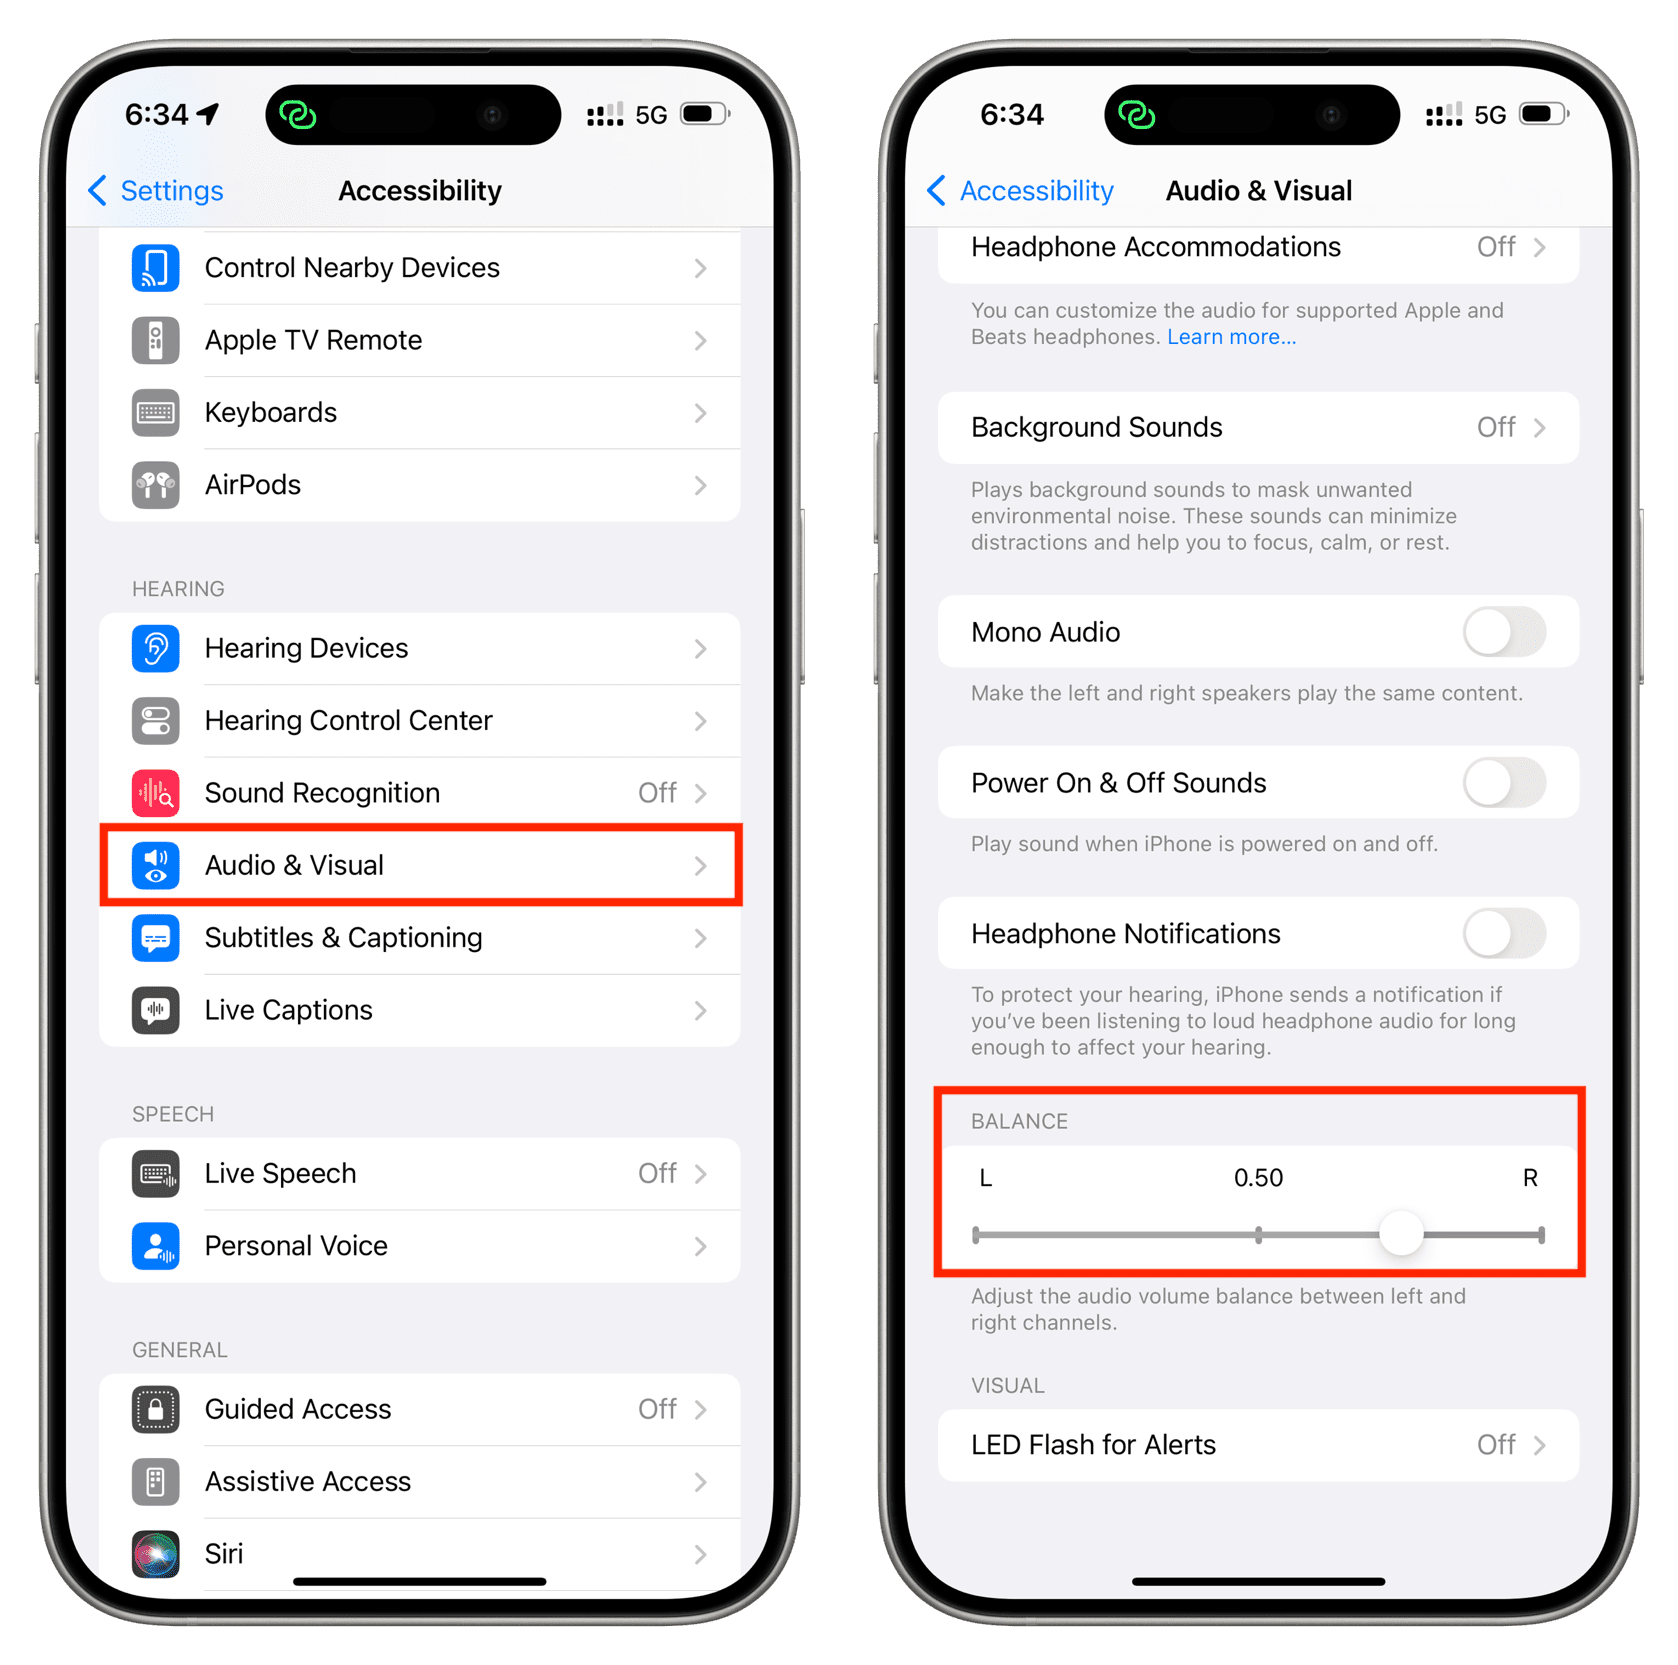 Adjust audio volume balance in iPhone Accessibility settings